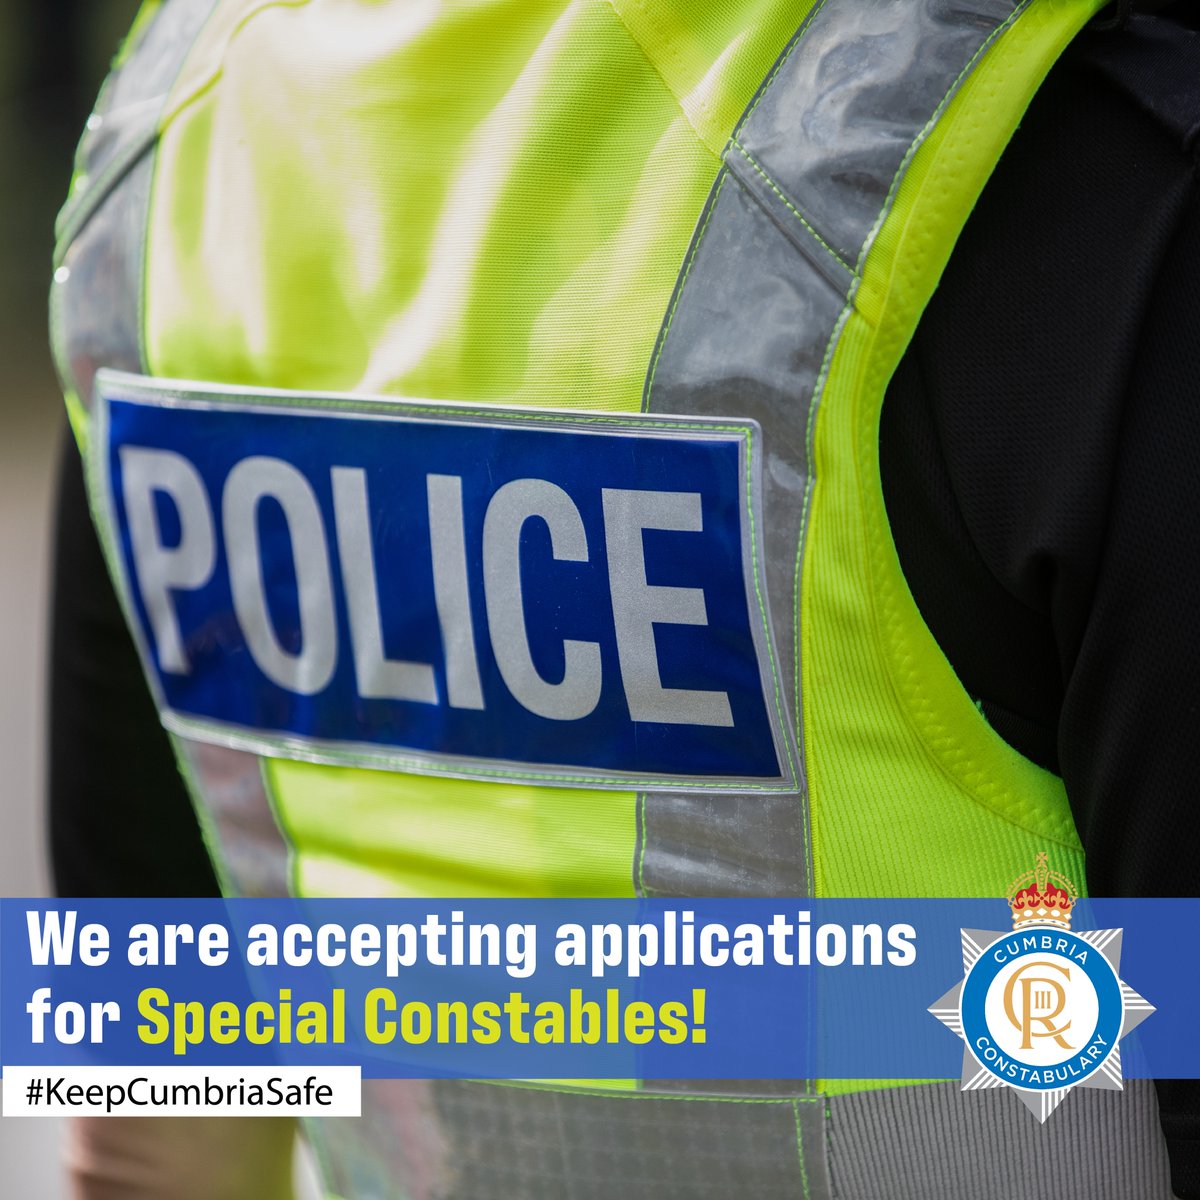 We are accepting applications for Special Constables in Barrow. Find out more about our special constabulary and apply here ➡️ orlo.uk/7zAxq